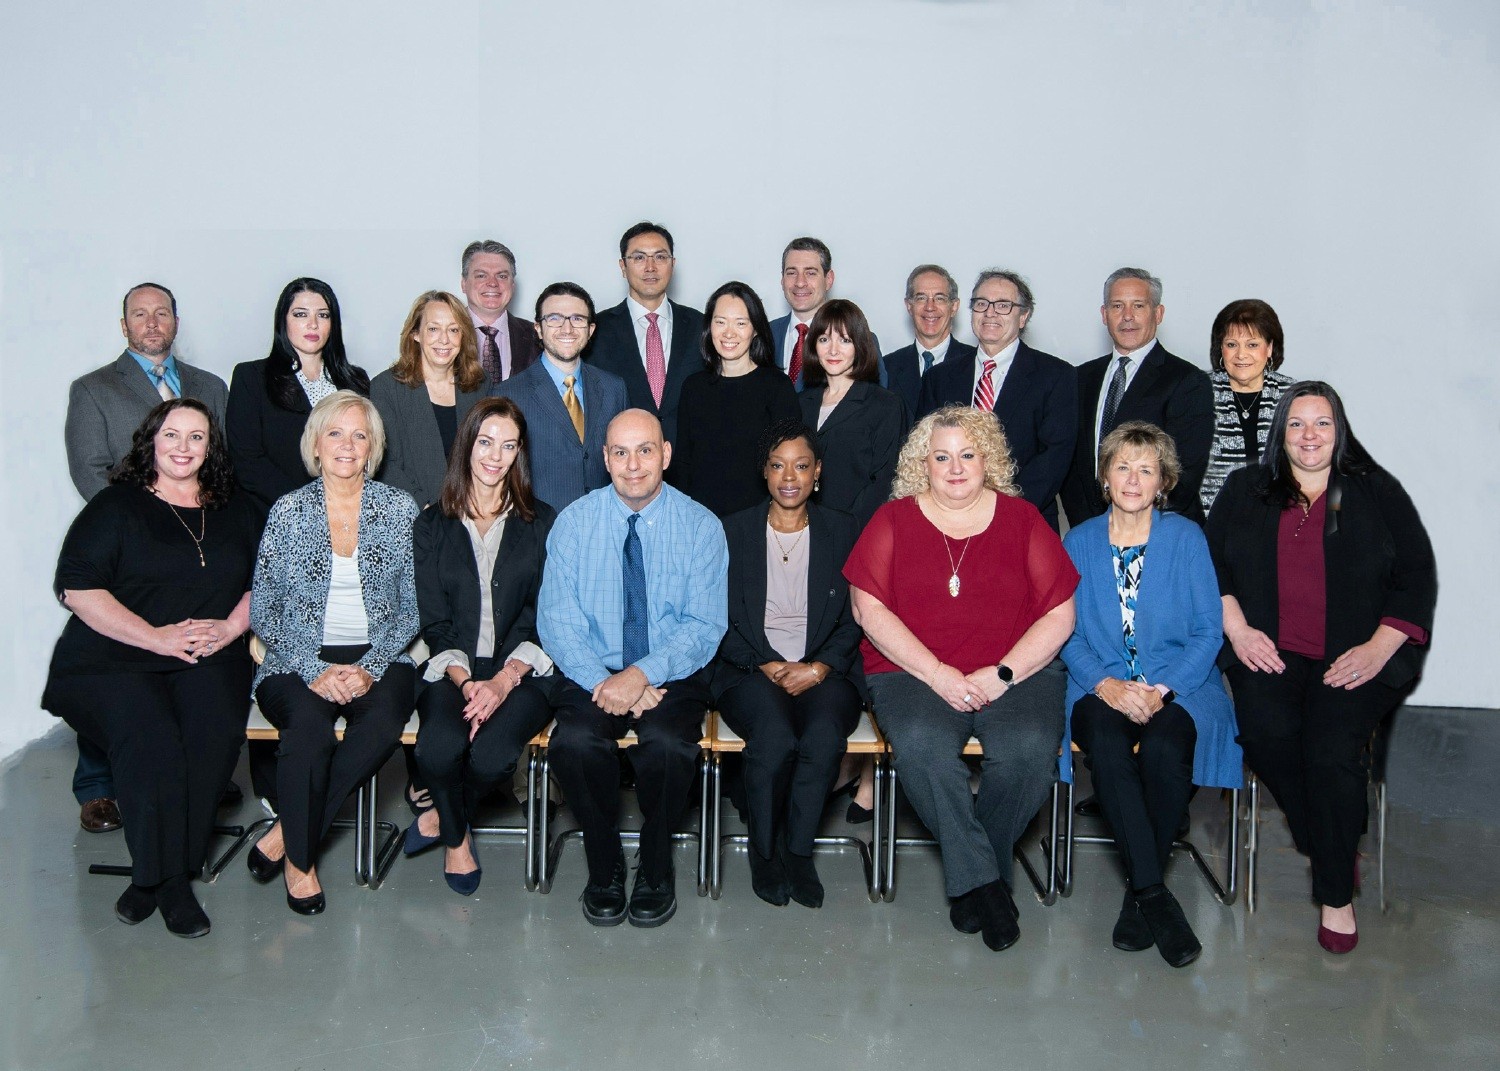 Radiology Associate of Ridgewood, P.A. leadership team and physicians